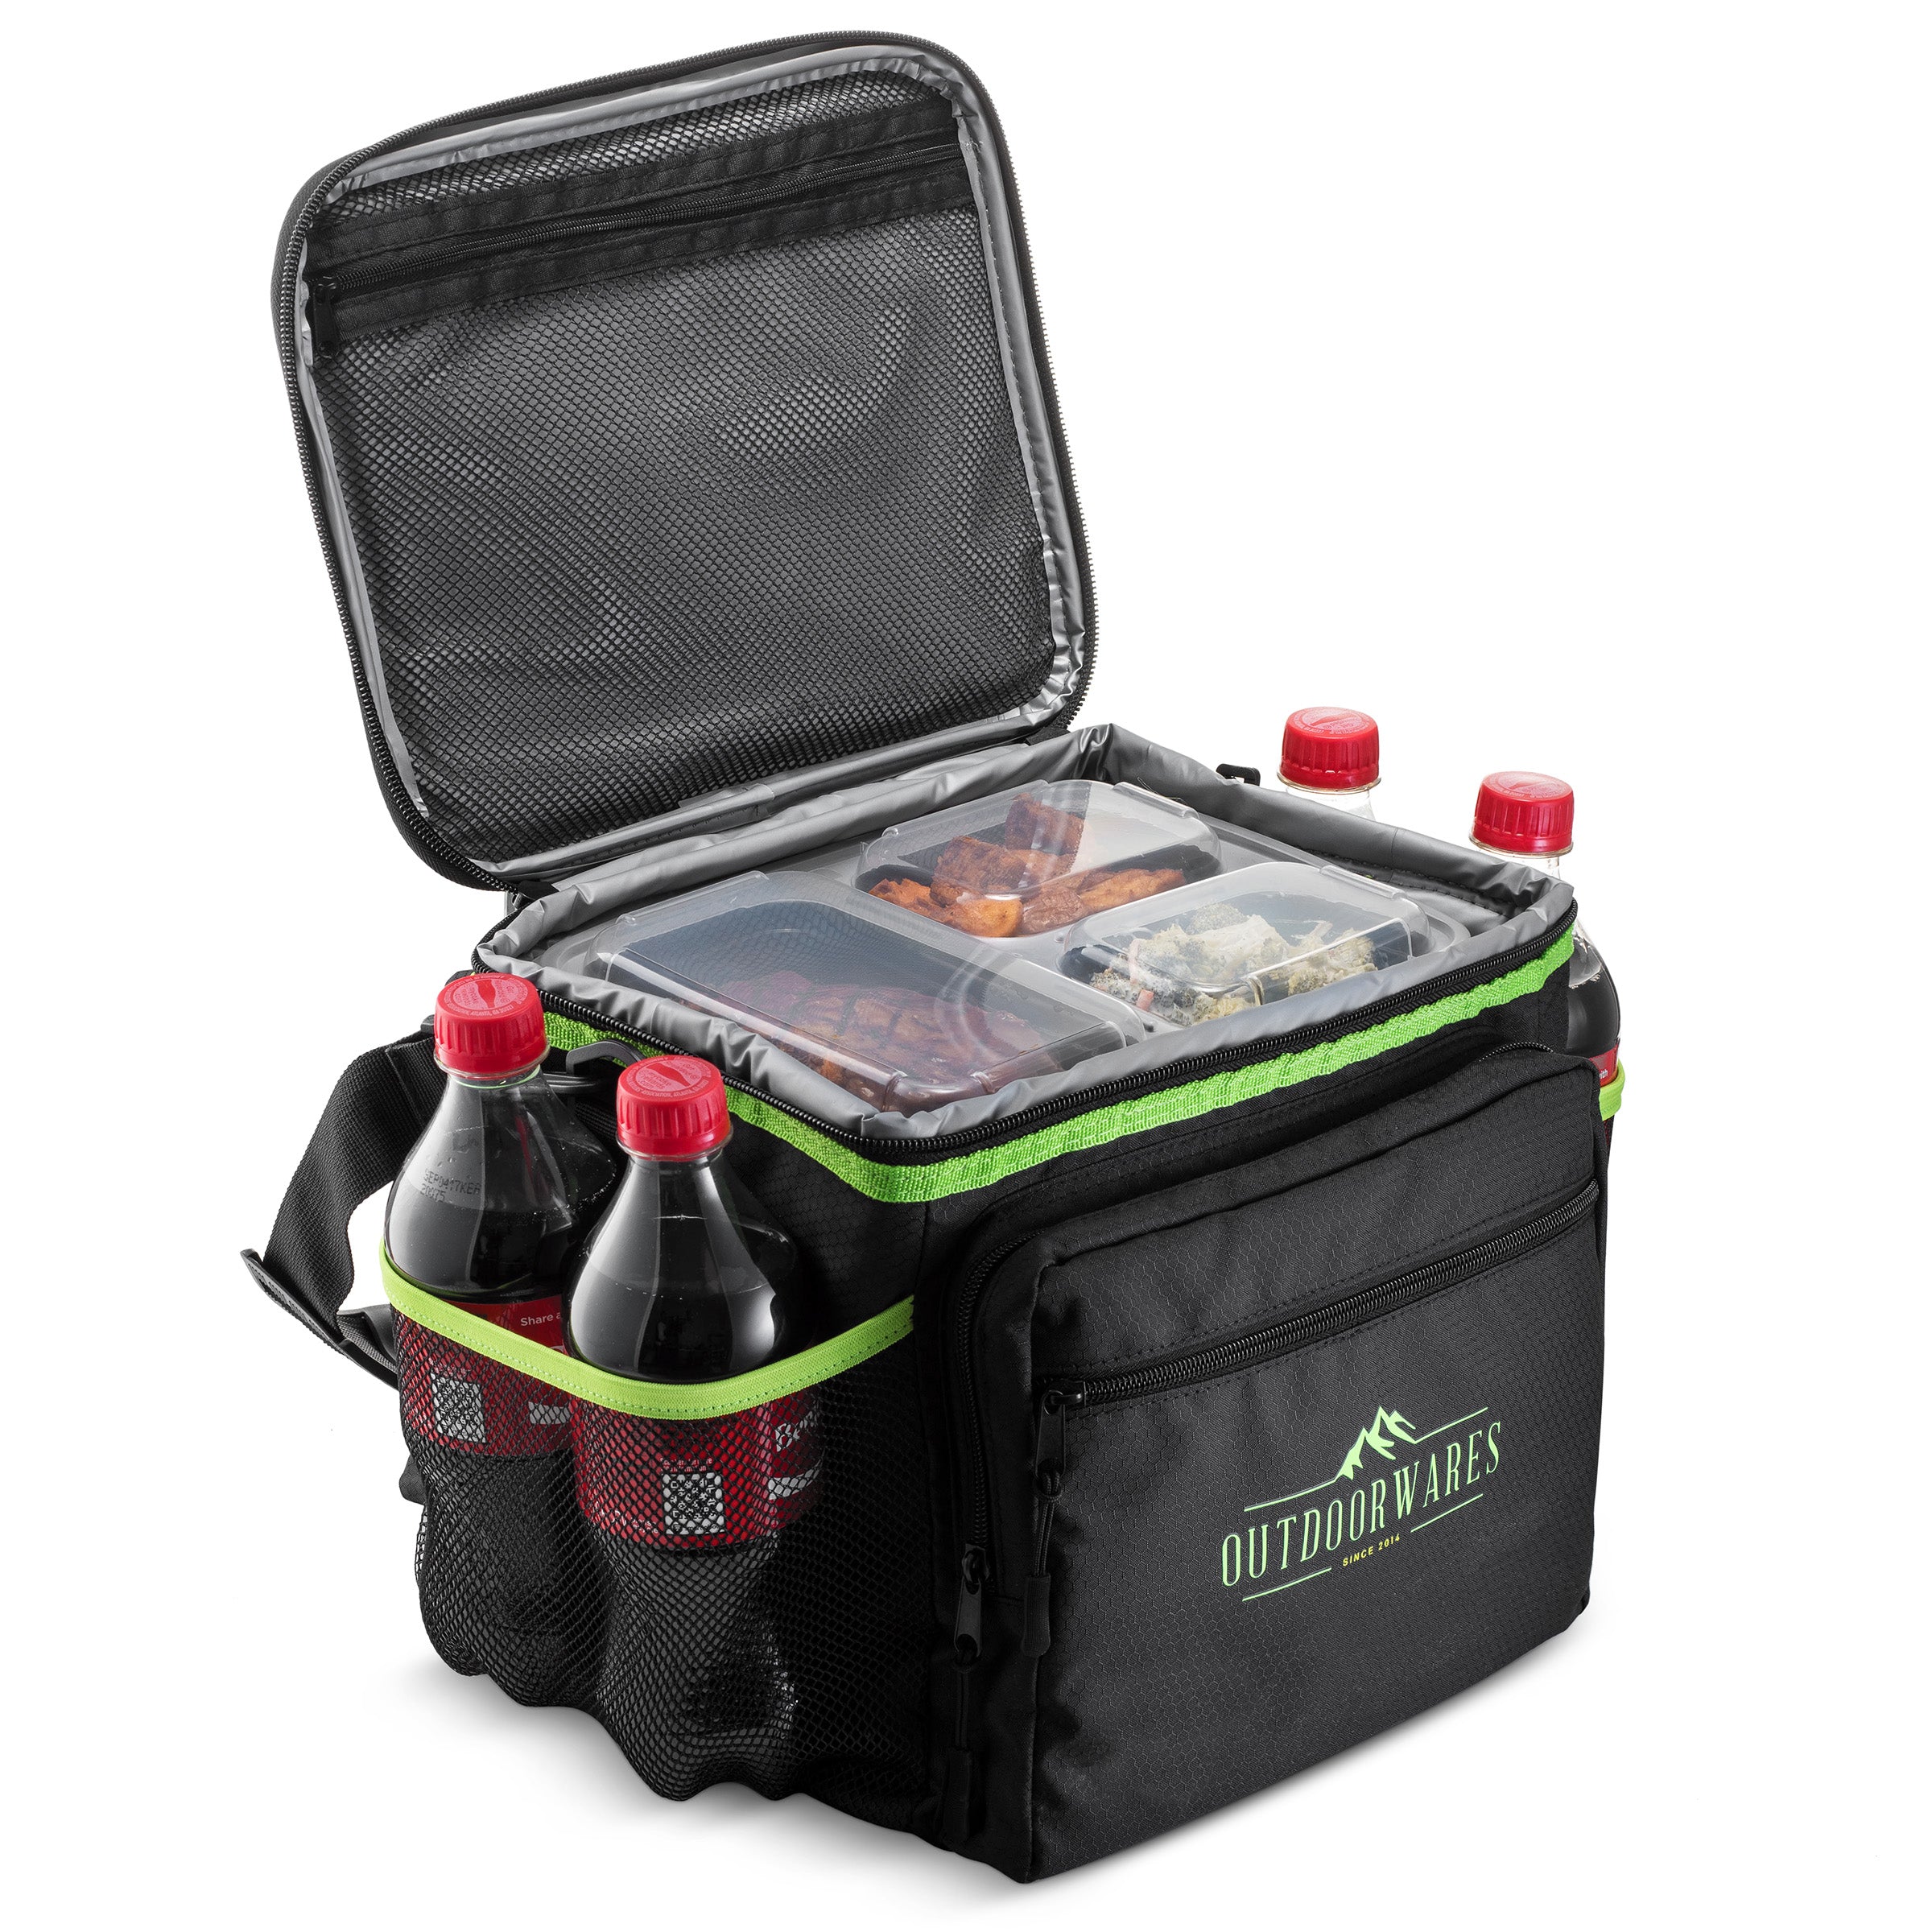 Cooler lunch Bag box - Insulated By Outdoorwares Large Capacity Durabl 